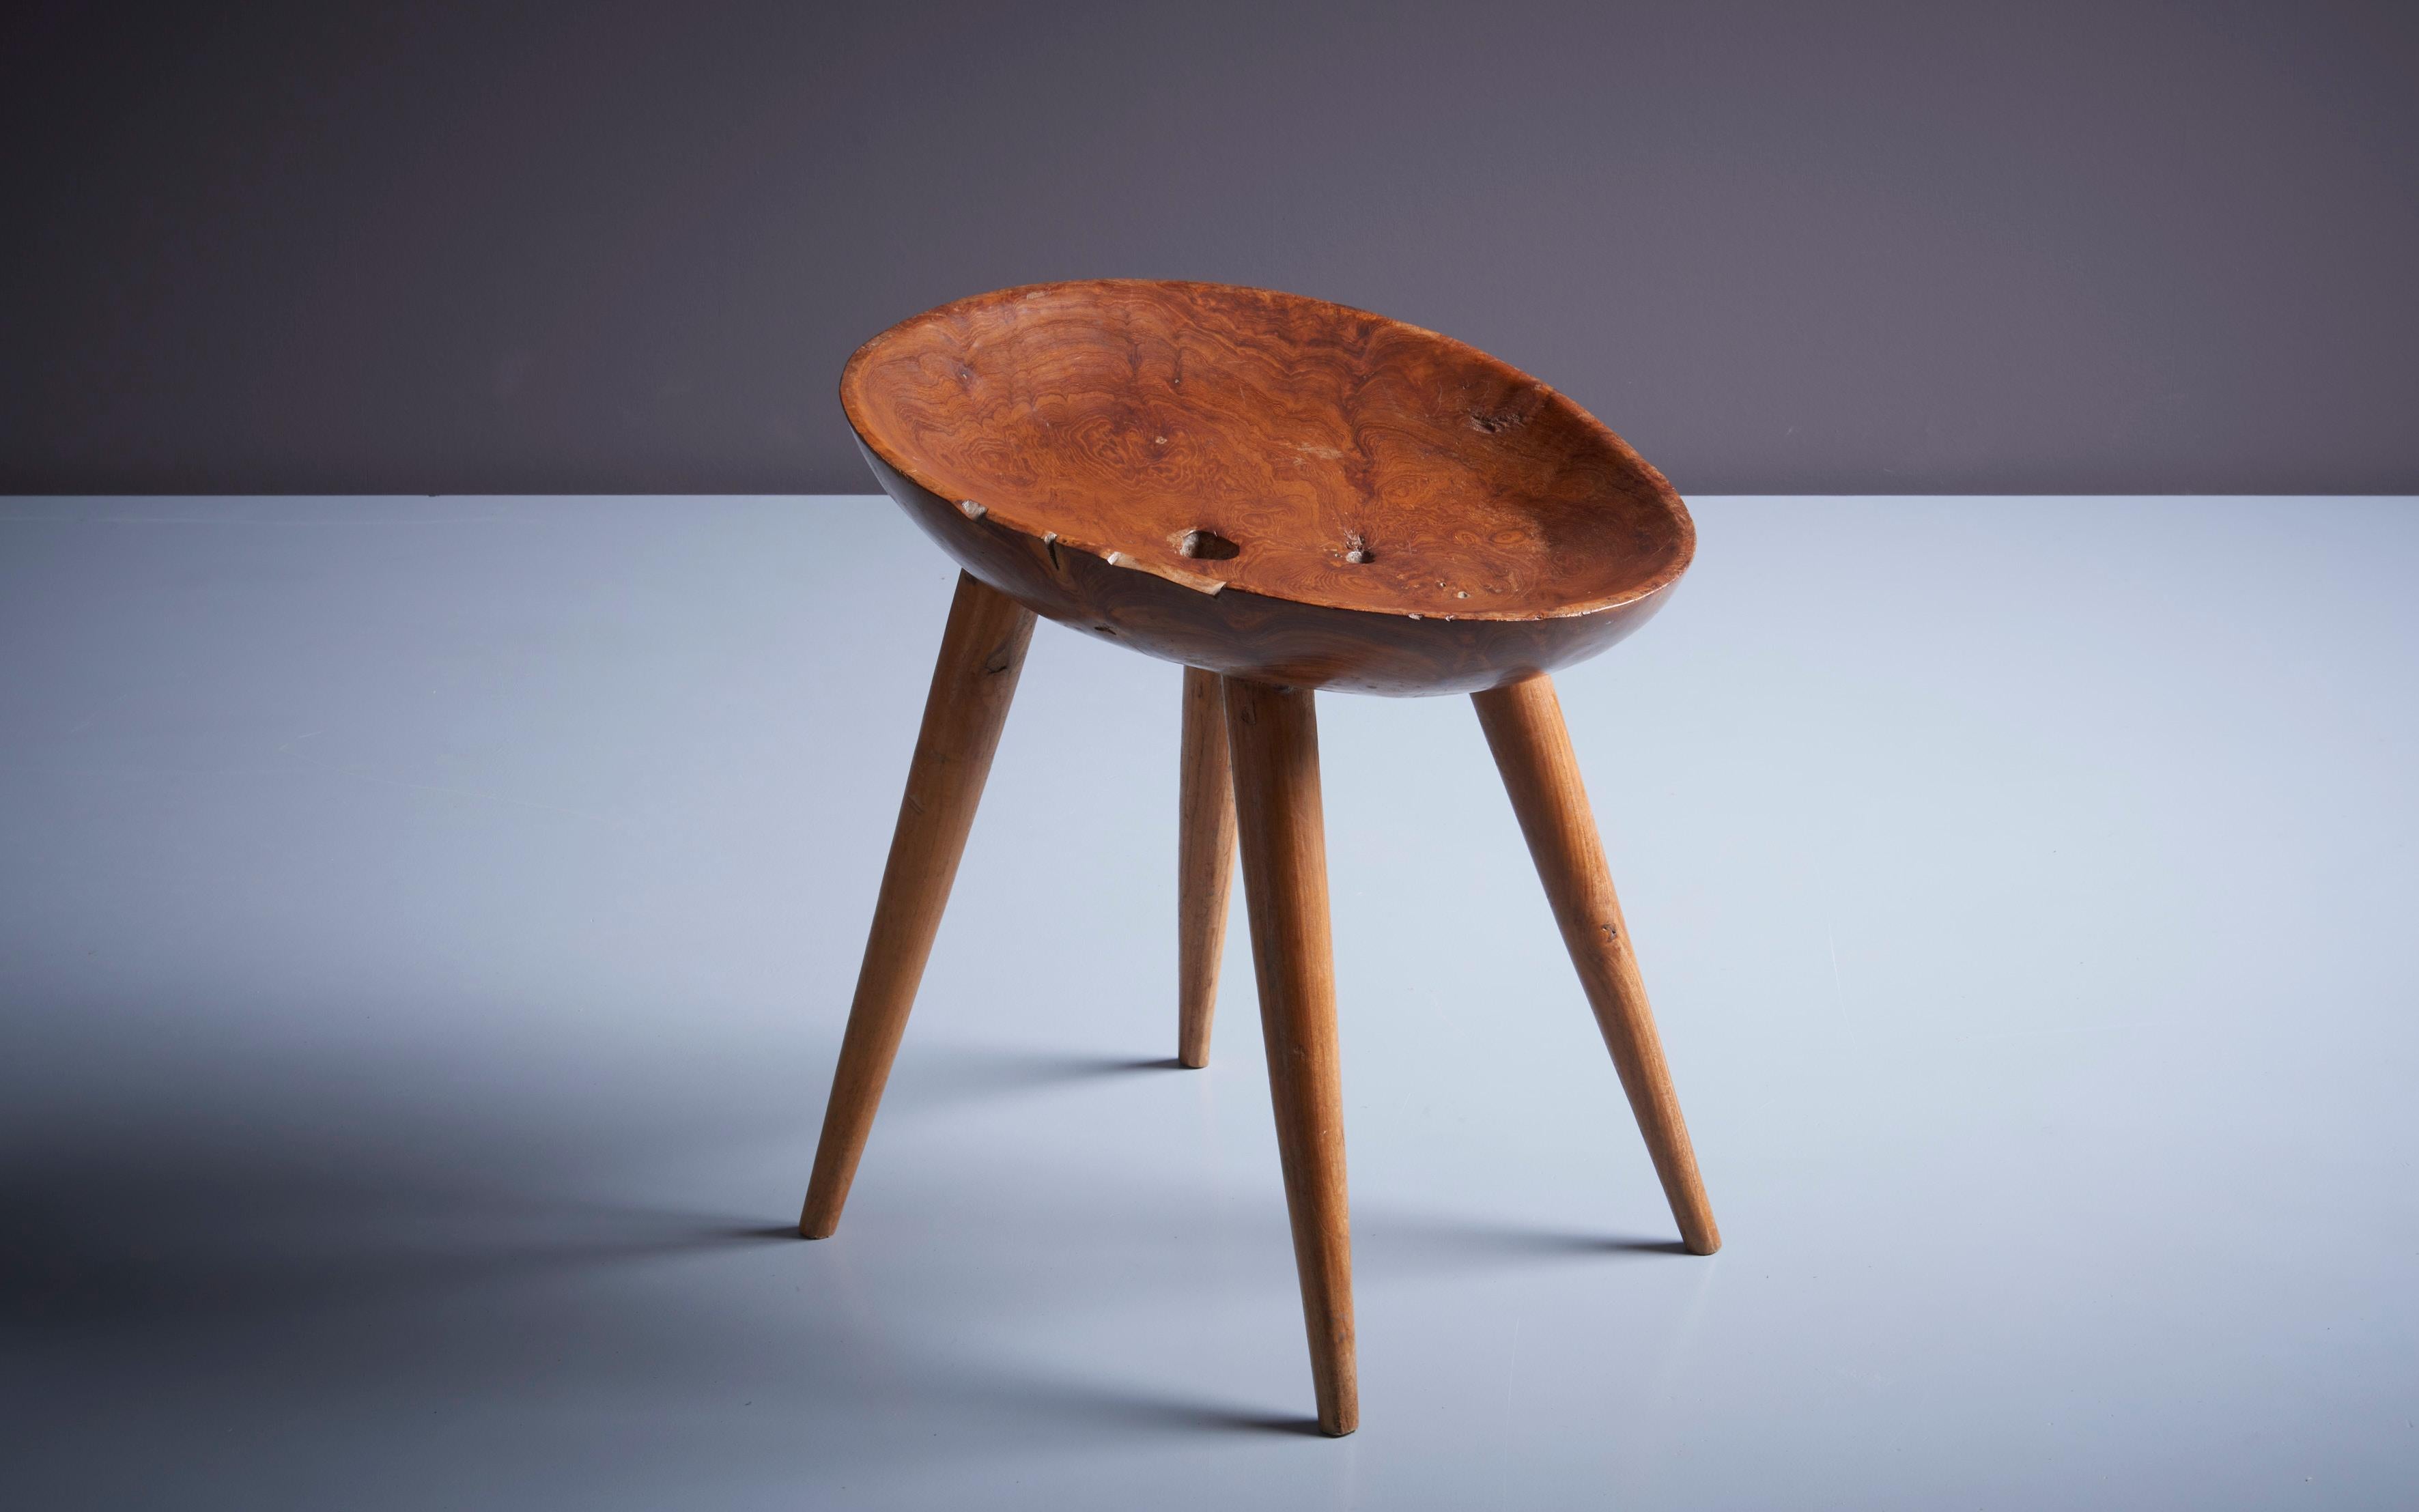 Sculptural French Studio Wood Stool with Carved Seat, France, 1960s In Good Condition For Sale In Berlin, DE